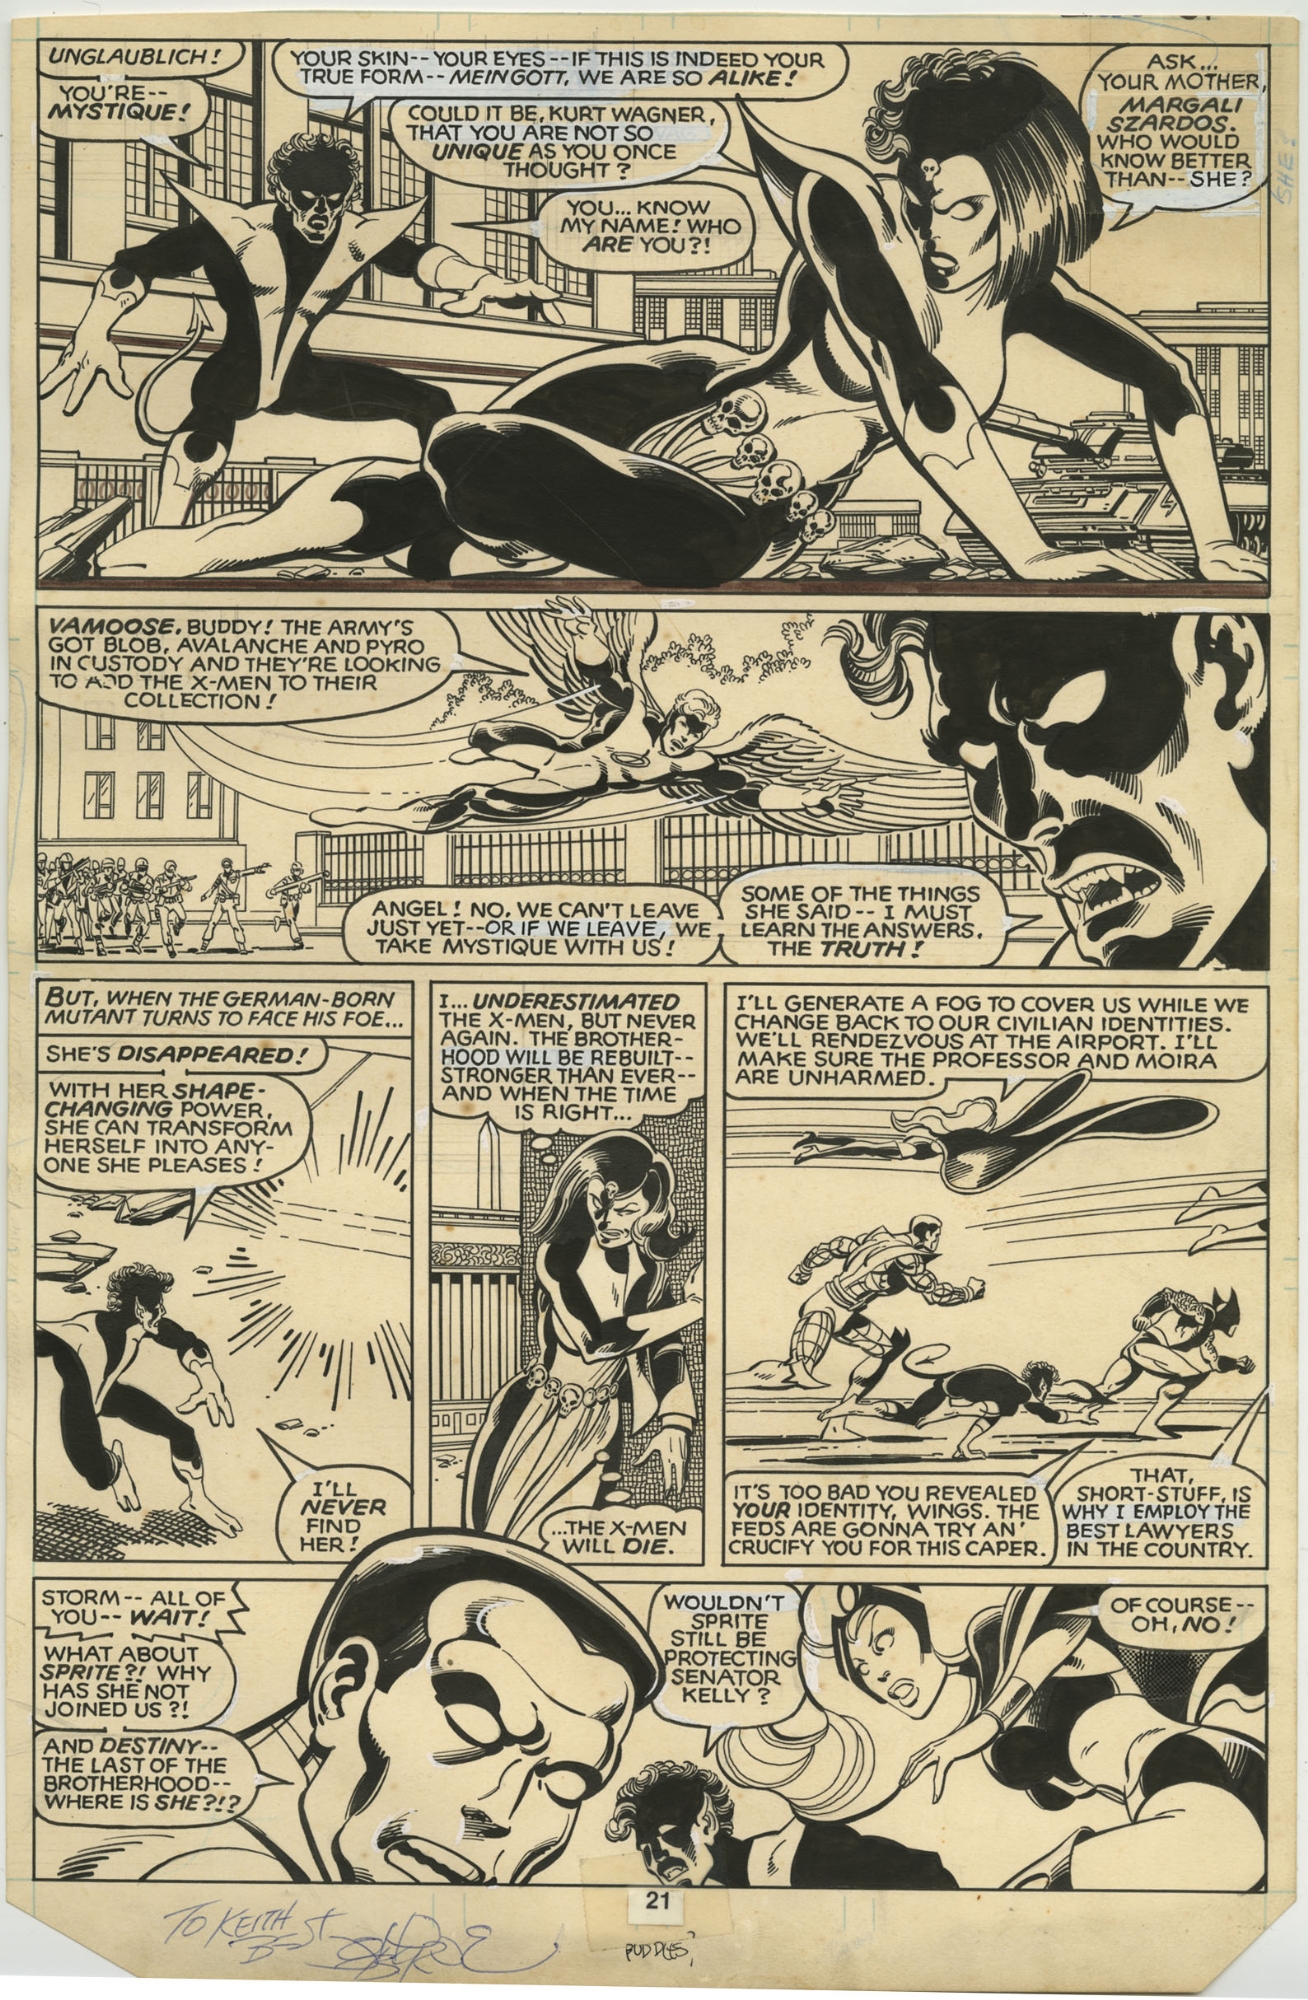 UNCANNY X-MEN #142 PAGE ( 1981, JOHN BYRNE ) DAYS OF FUTURE PAST , MYSTIQUE  HINTS SHE'S NIGHTCRAWLER'S MOM; AUSTIN INKS, in ComicLINK.Com Auctions's  CLOSED FEATURED AUCTION HIGHLIGHTS - 022018 Comic Art Gallery Room